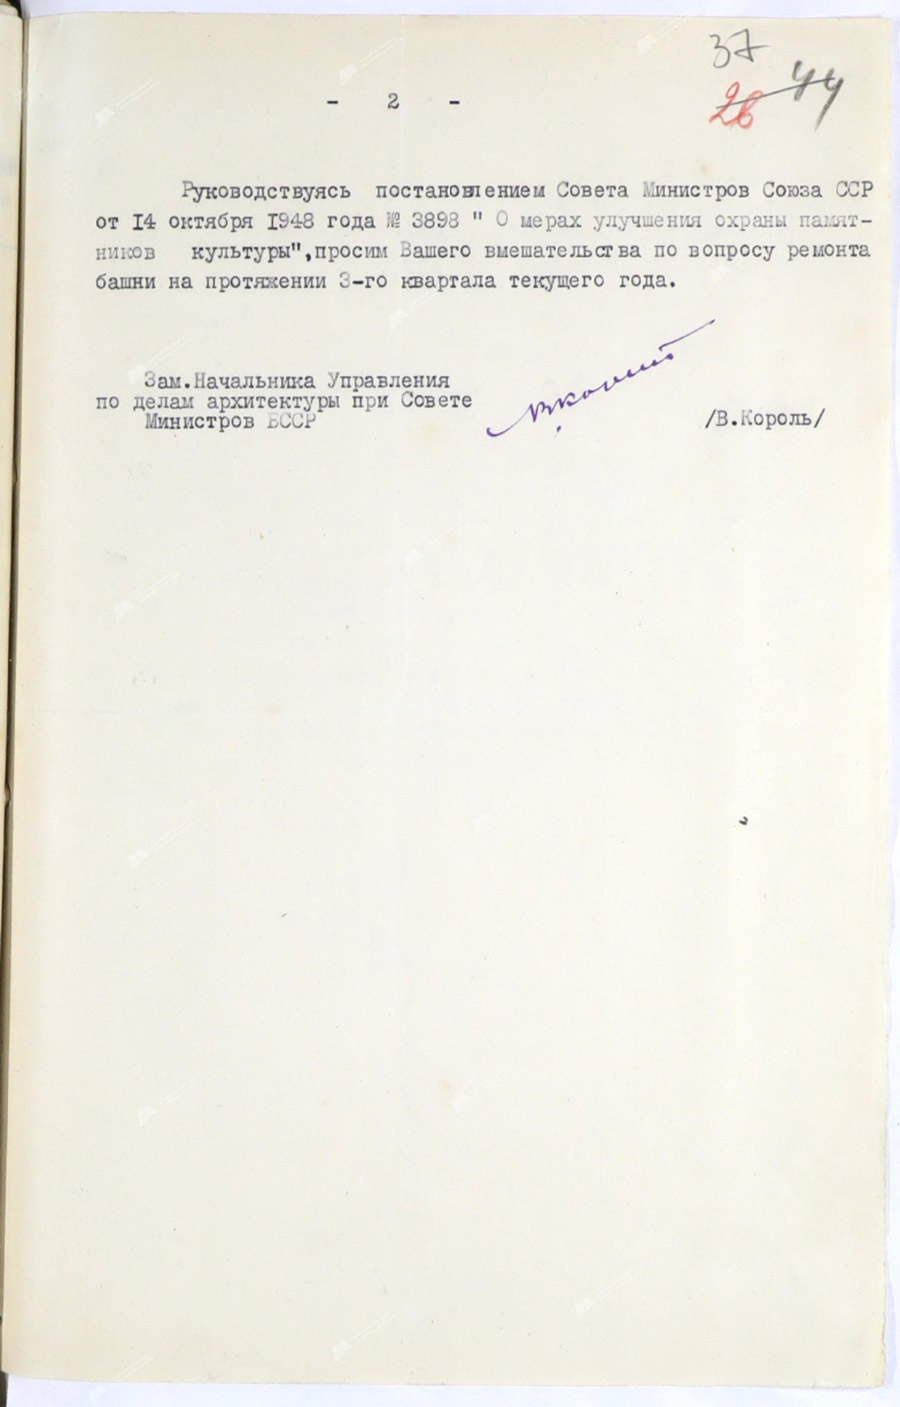 Letter from the deputy. Head of the Directorate for Architectural Affairs under the Council of Ministers of the BSSR on July 13, 1949 on the issue of repairing the St. Sophia Cathedral in Polotsk-с. 1